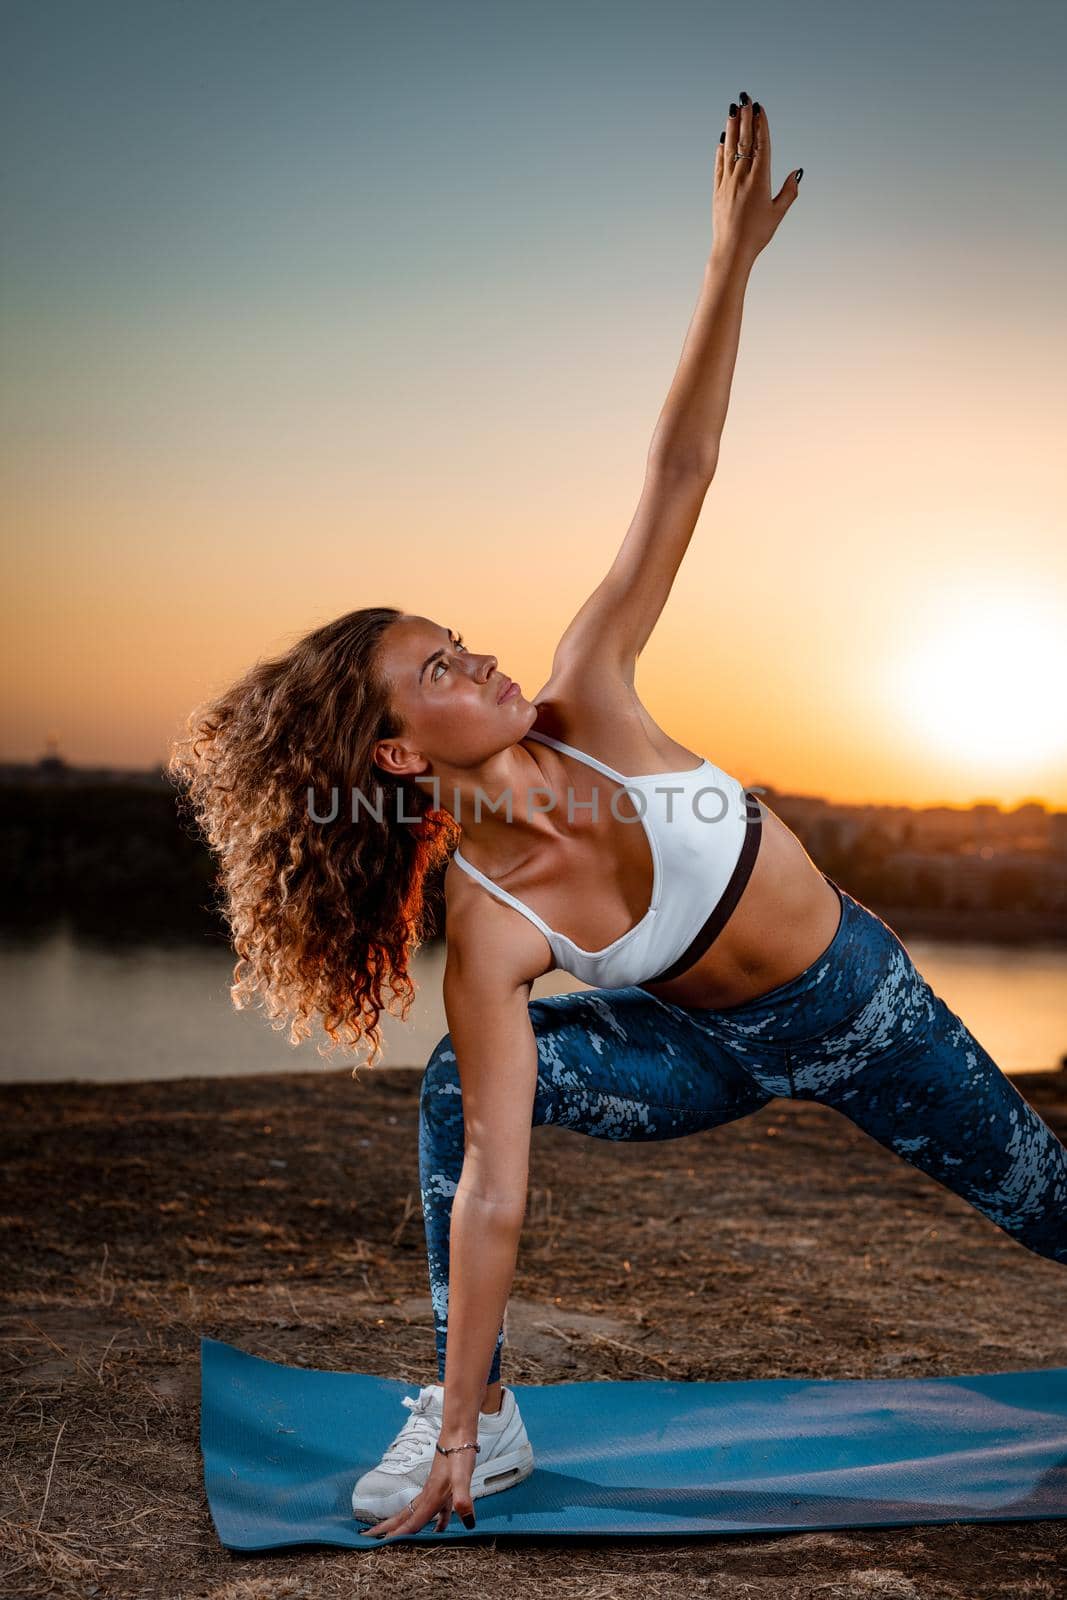 Young urban woman doing stretching exercises by the river in a sunset.